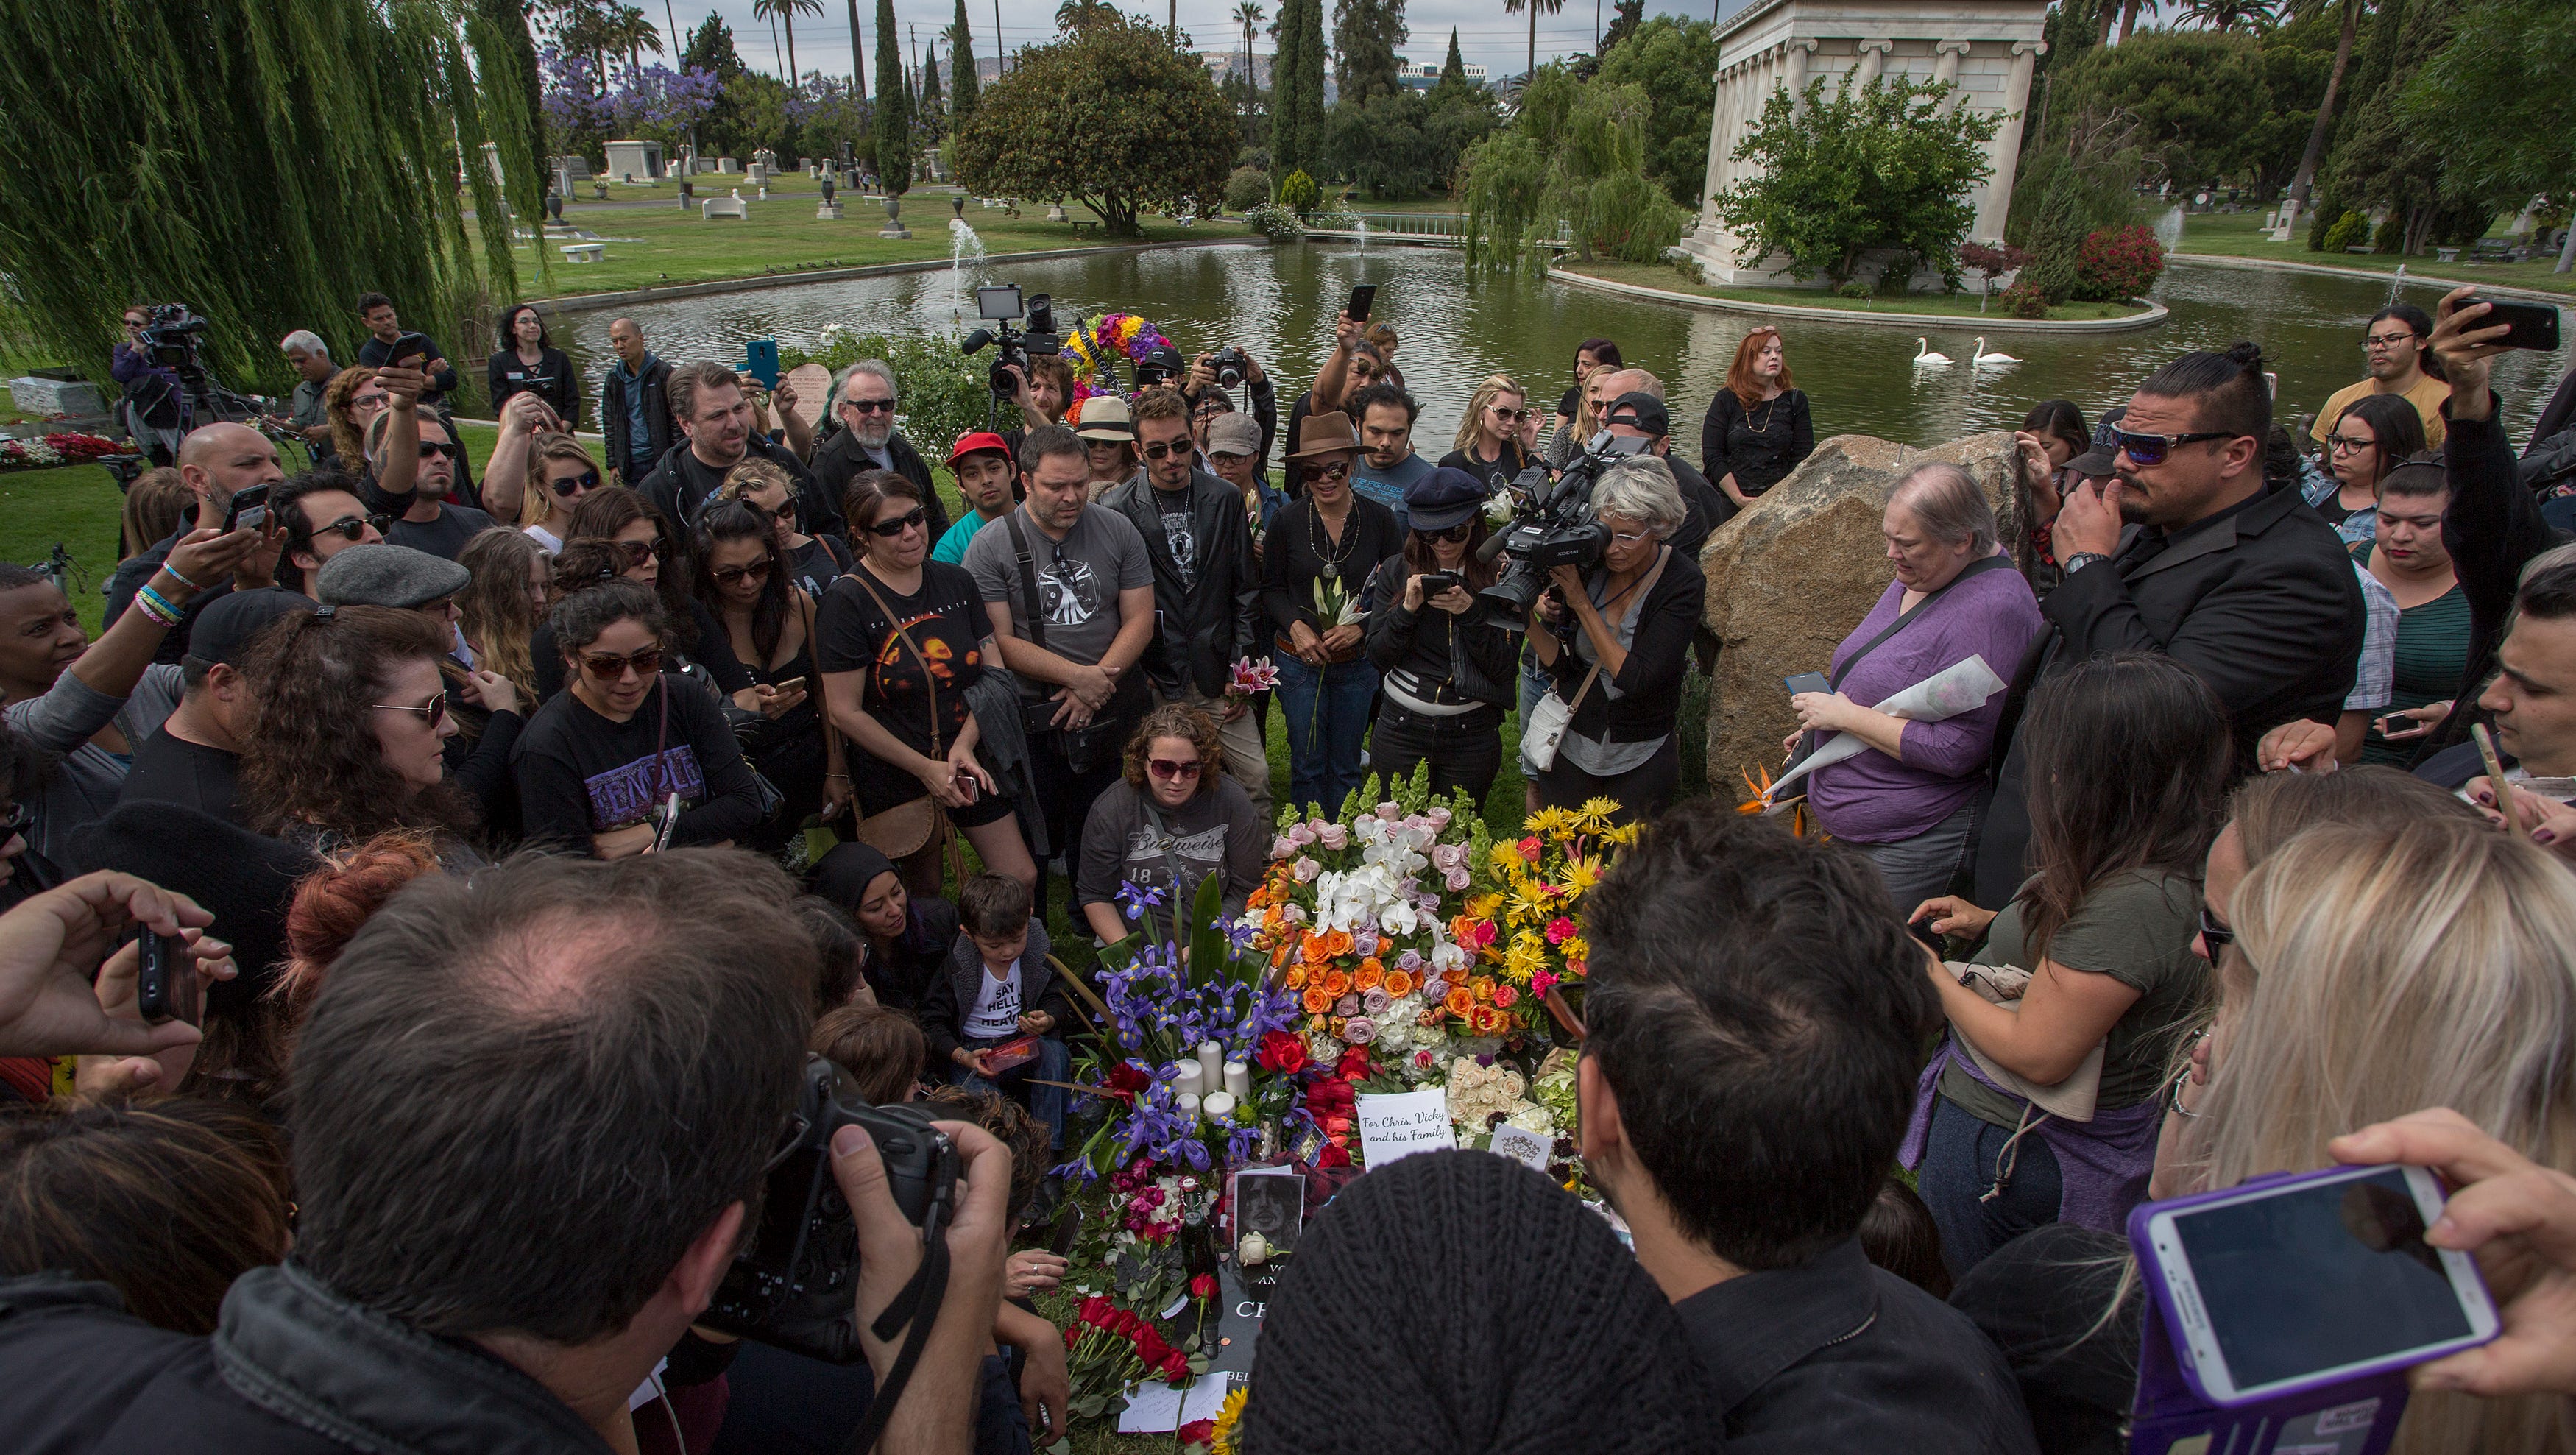 Fans mourn graveside after services for Soundgarden frontman Chris Cornell at Hollywood Forever Cemetery in Los Angeles. The grunge-rock icon was pronounced dead in the early morning hours of May 18 after a Soundgarden performance that evening in Detroit. He was 52.